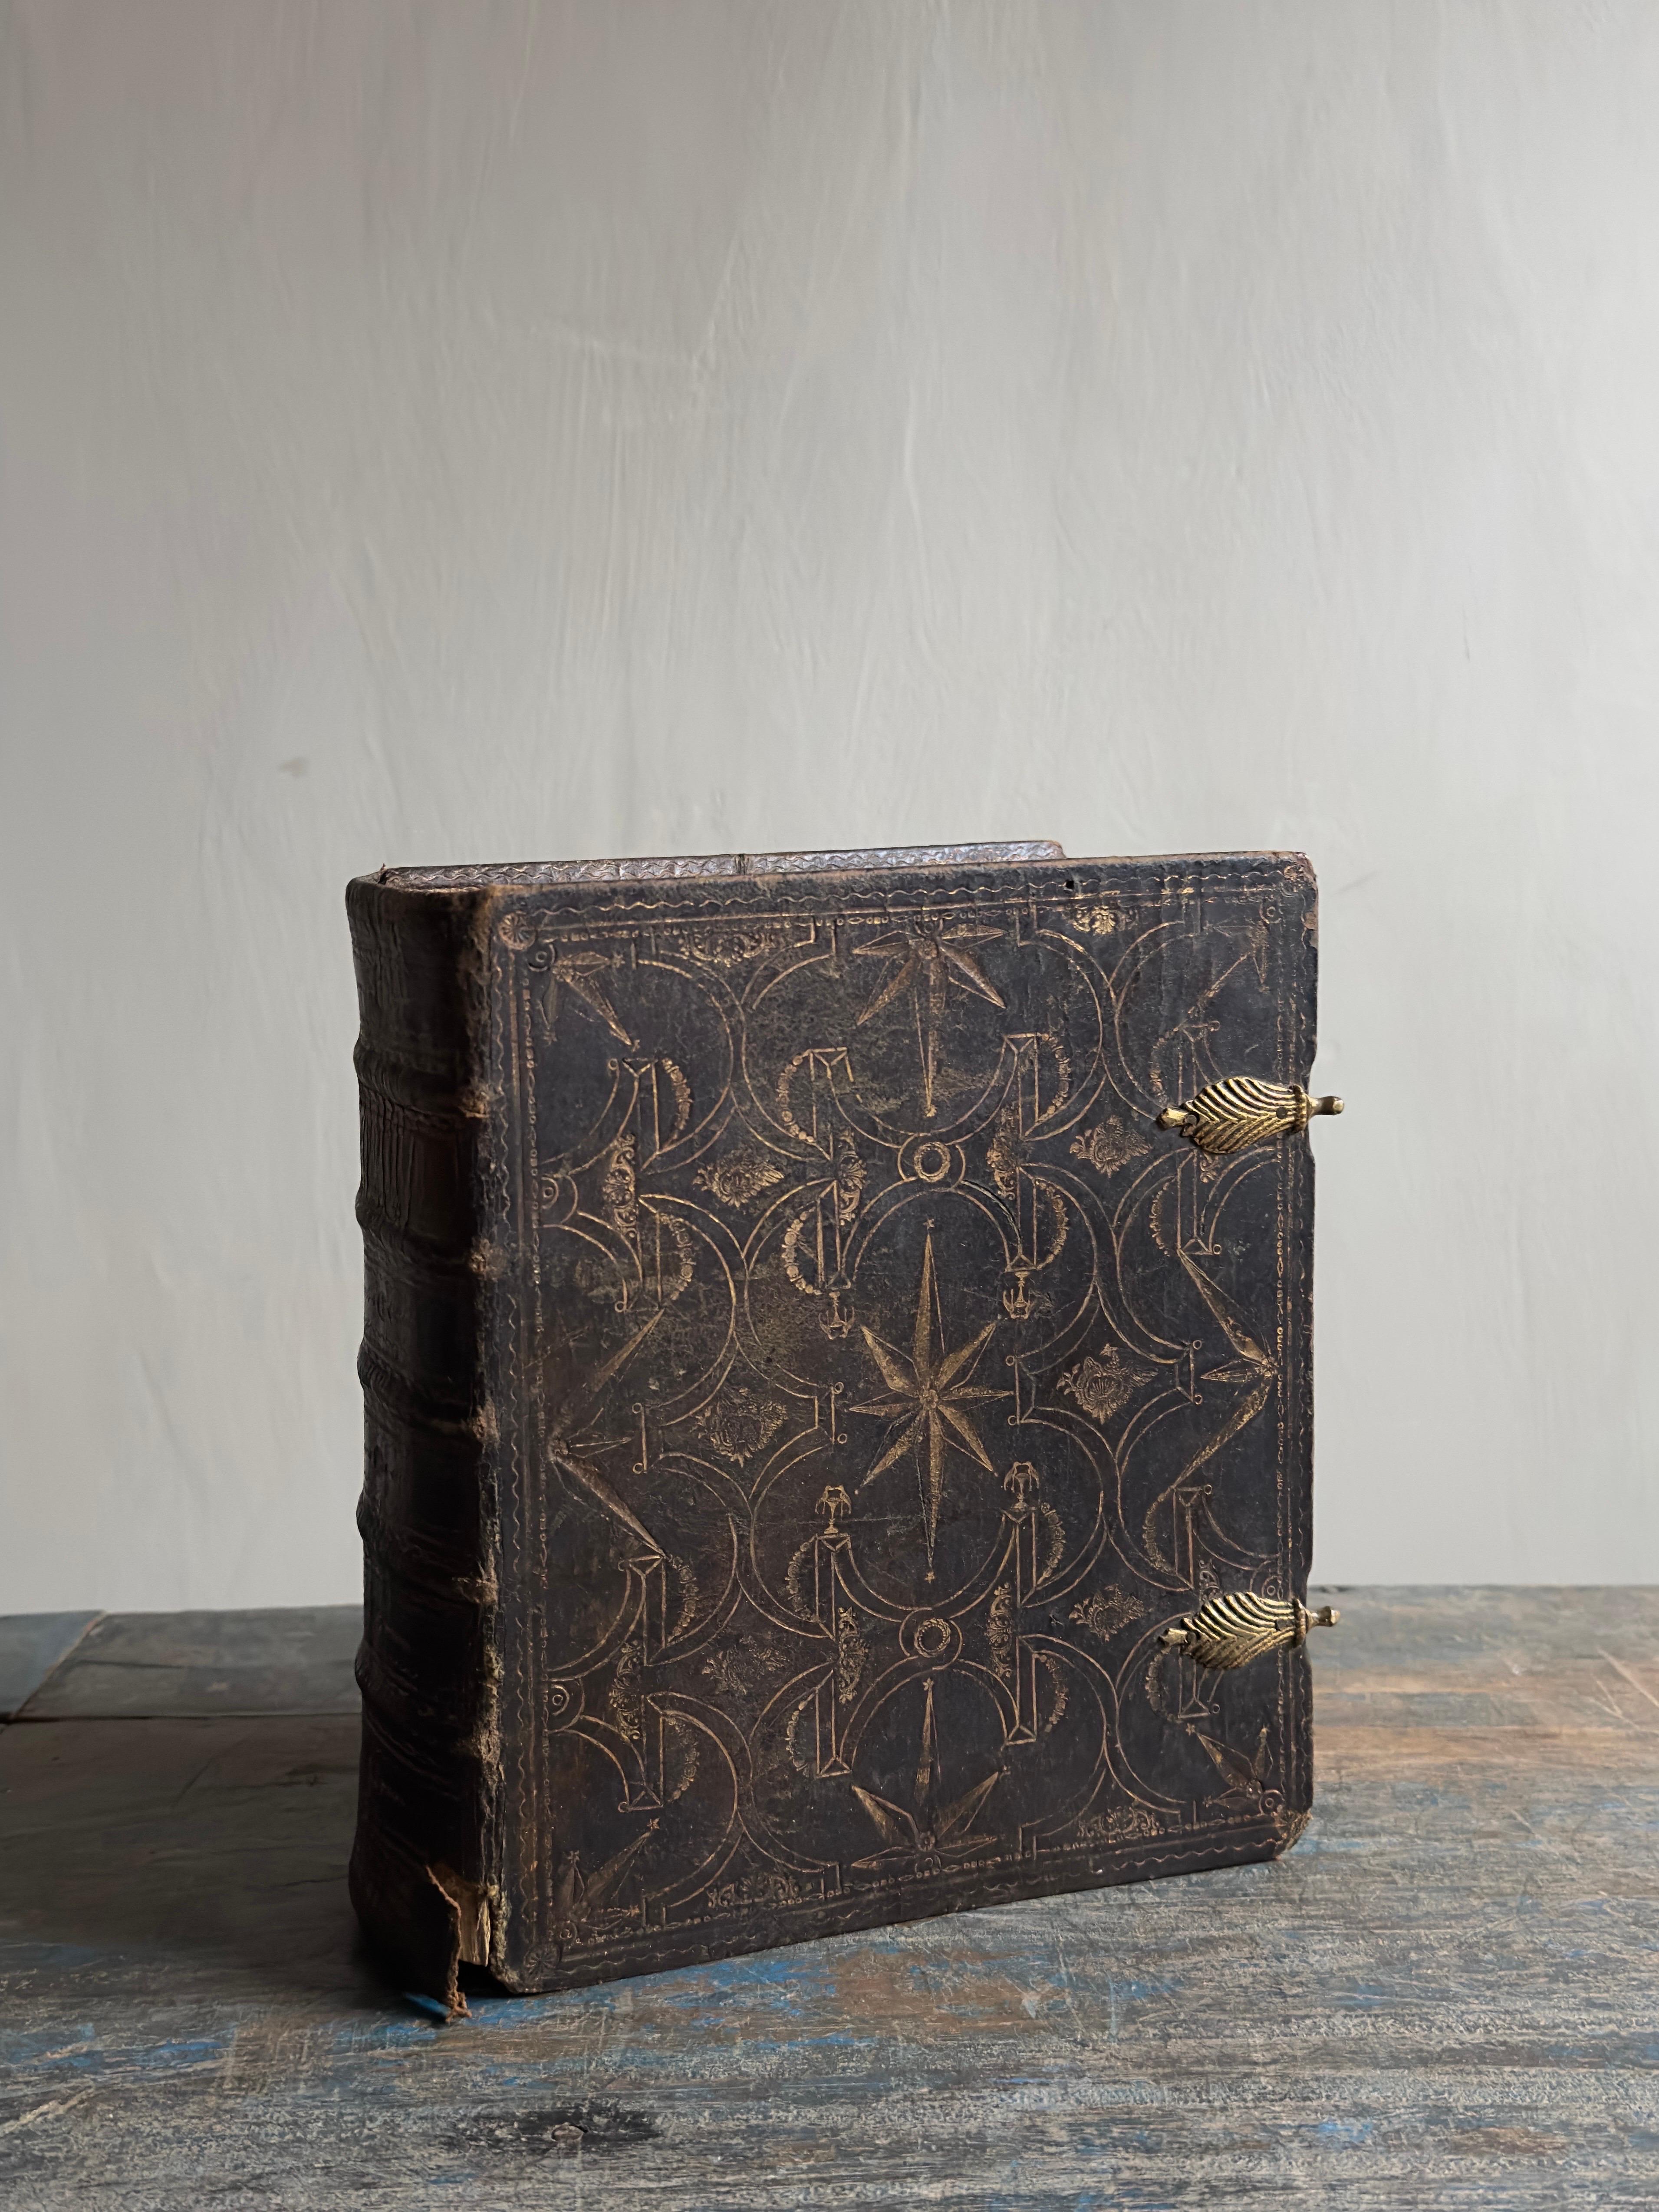 A beautiful antique bible from Scandinavia in the year 1810. The cover are probably even older, possibly late 1700s. 

Works perfect as a Wabi Sabi decoration element to give the room a certain vibe.